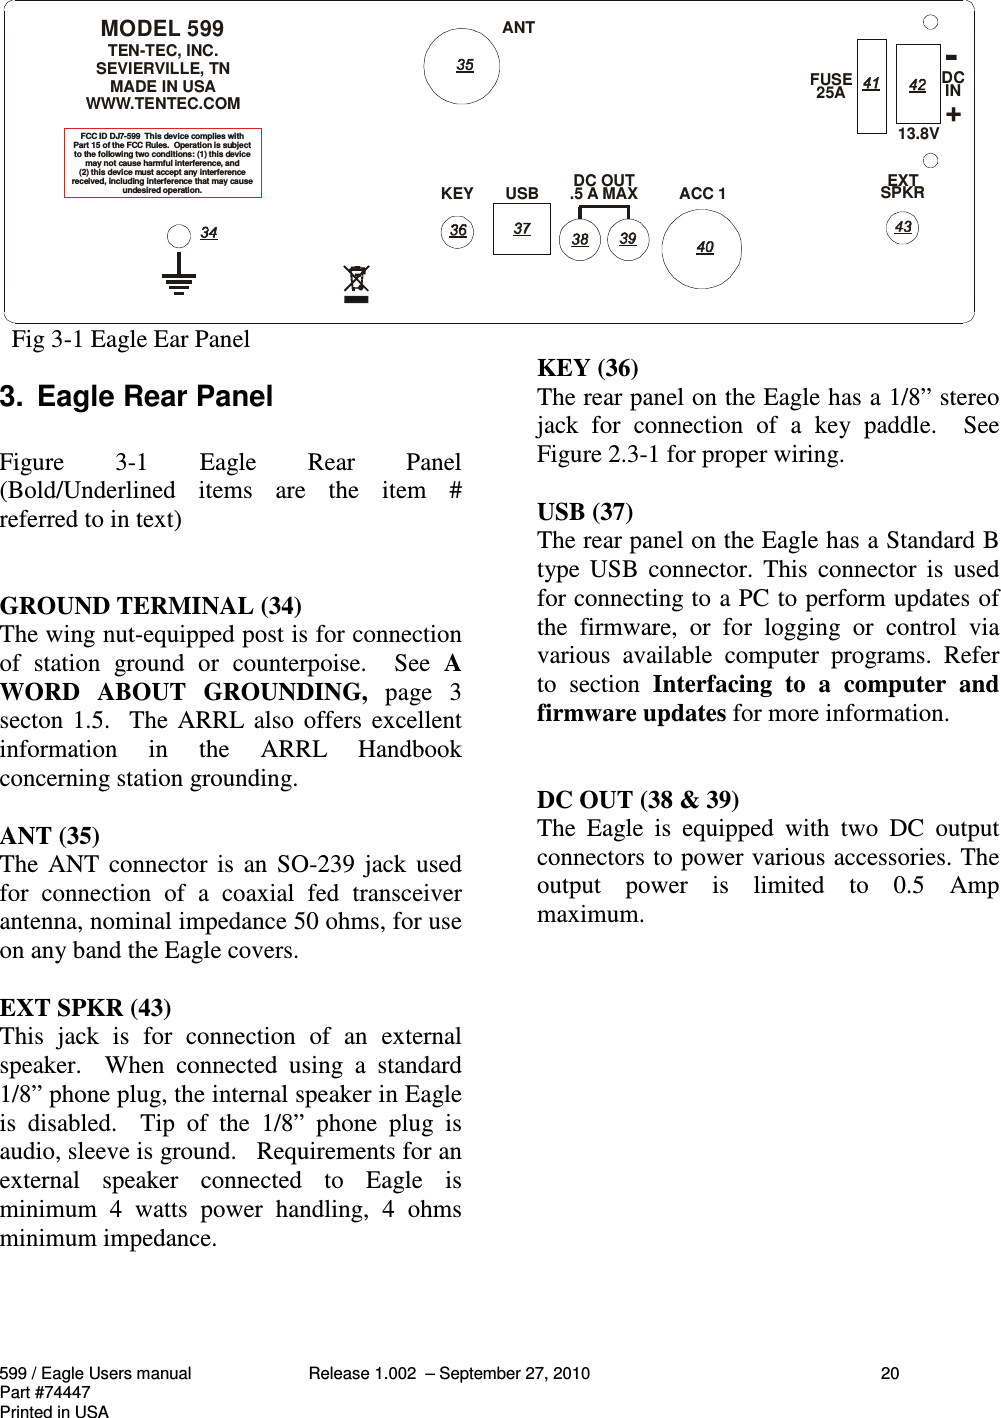 599 / Eagle Users manual Release 1.002  – September 27, 2010 20Part #74447Printed in USA  Fig 3-1 Eagle Ear Panel3.  Eagle Rear PanelFigure  3-1  Eagle  Rear  Panel(Bold/Underlined  items  are  the  item  #referred to in text)GROUND TERMINAL (34)The wing nut-equipped post is for connectionof  station  ground  or  counterpoise.    See  AWORD  ABOUT  GROUNDING,  page  3secton 1.5.  The ARRL also offers excellentinformation  in  the  ARRL  Handbookconcerning station grounding.ANT (35)The ANT connector is  an  SO-239 jack  usedfor  connection  of  a  coaxial  fed  transceiverantenna, nominal impedance 50 ohms, for useon any band the Eagle covers.EXT SPKR (43)This  jack  is  for  connection  of  an  externalspeaker.    When  connected  using  a  standard1/8” phone plug, the internal speaker in Eagleis  disabled.    Tip  of  the  1/8”  phone  plug  isaudio, sleeve is ground.   Requirements for anexternal  speaker  connected  to  Eagle  isminimum  4  watts  power  handling,  4  ohmsminimum impedance.KEY (36)The rear panel on the Eagle has a 1/8” stereojack  for  connection  of  a  key  paddle.    SeeFigure 2.3-1 for proper wiring.USB (37)The rear panel on the Eagle has a Standard Btype USB  connector.  This  connector  is  usedfor connecting to a PC to perform updates ofthe  firmware,  or  for  logging  or  control  viavarious  available  computer  programs.  Referto  section  Interfacing  to  a  computer  andfirmware updates for more information.DC OUT (38 &amp; 39)The  Eagle  is  equipped  with  two  DC  outputconnectors to power various accessories. Theoutput  power  is  limited  to  0.5  Ampmaximum.IN25AKEYANTUSBACC 1 SPKR EXT13.8VFUSE DCMODEL 599TEN-TEC, INC.SEVIERVILLE, TN MADE IN USAWWW.TENTEC.COMDC OUT.5 A MAX-+FCC ID DJ7-599  This device complies withPart 15 of the FCC Rules.  Operation is subjectto the following two conditions: (1) this devicemay not cause harmful interference, and(2) this device must accept any interferencereceived, including interference that may causeundesired operation.